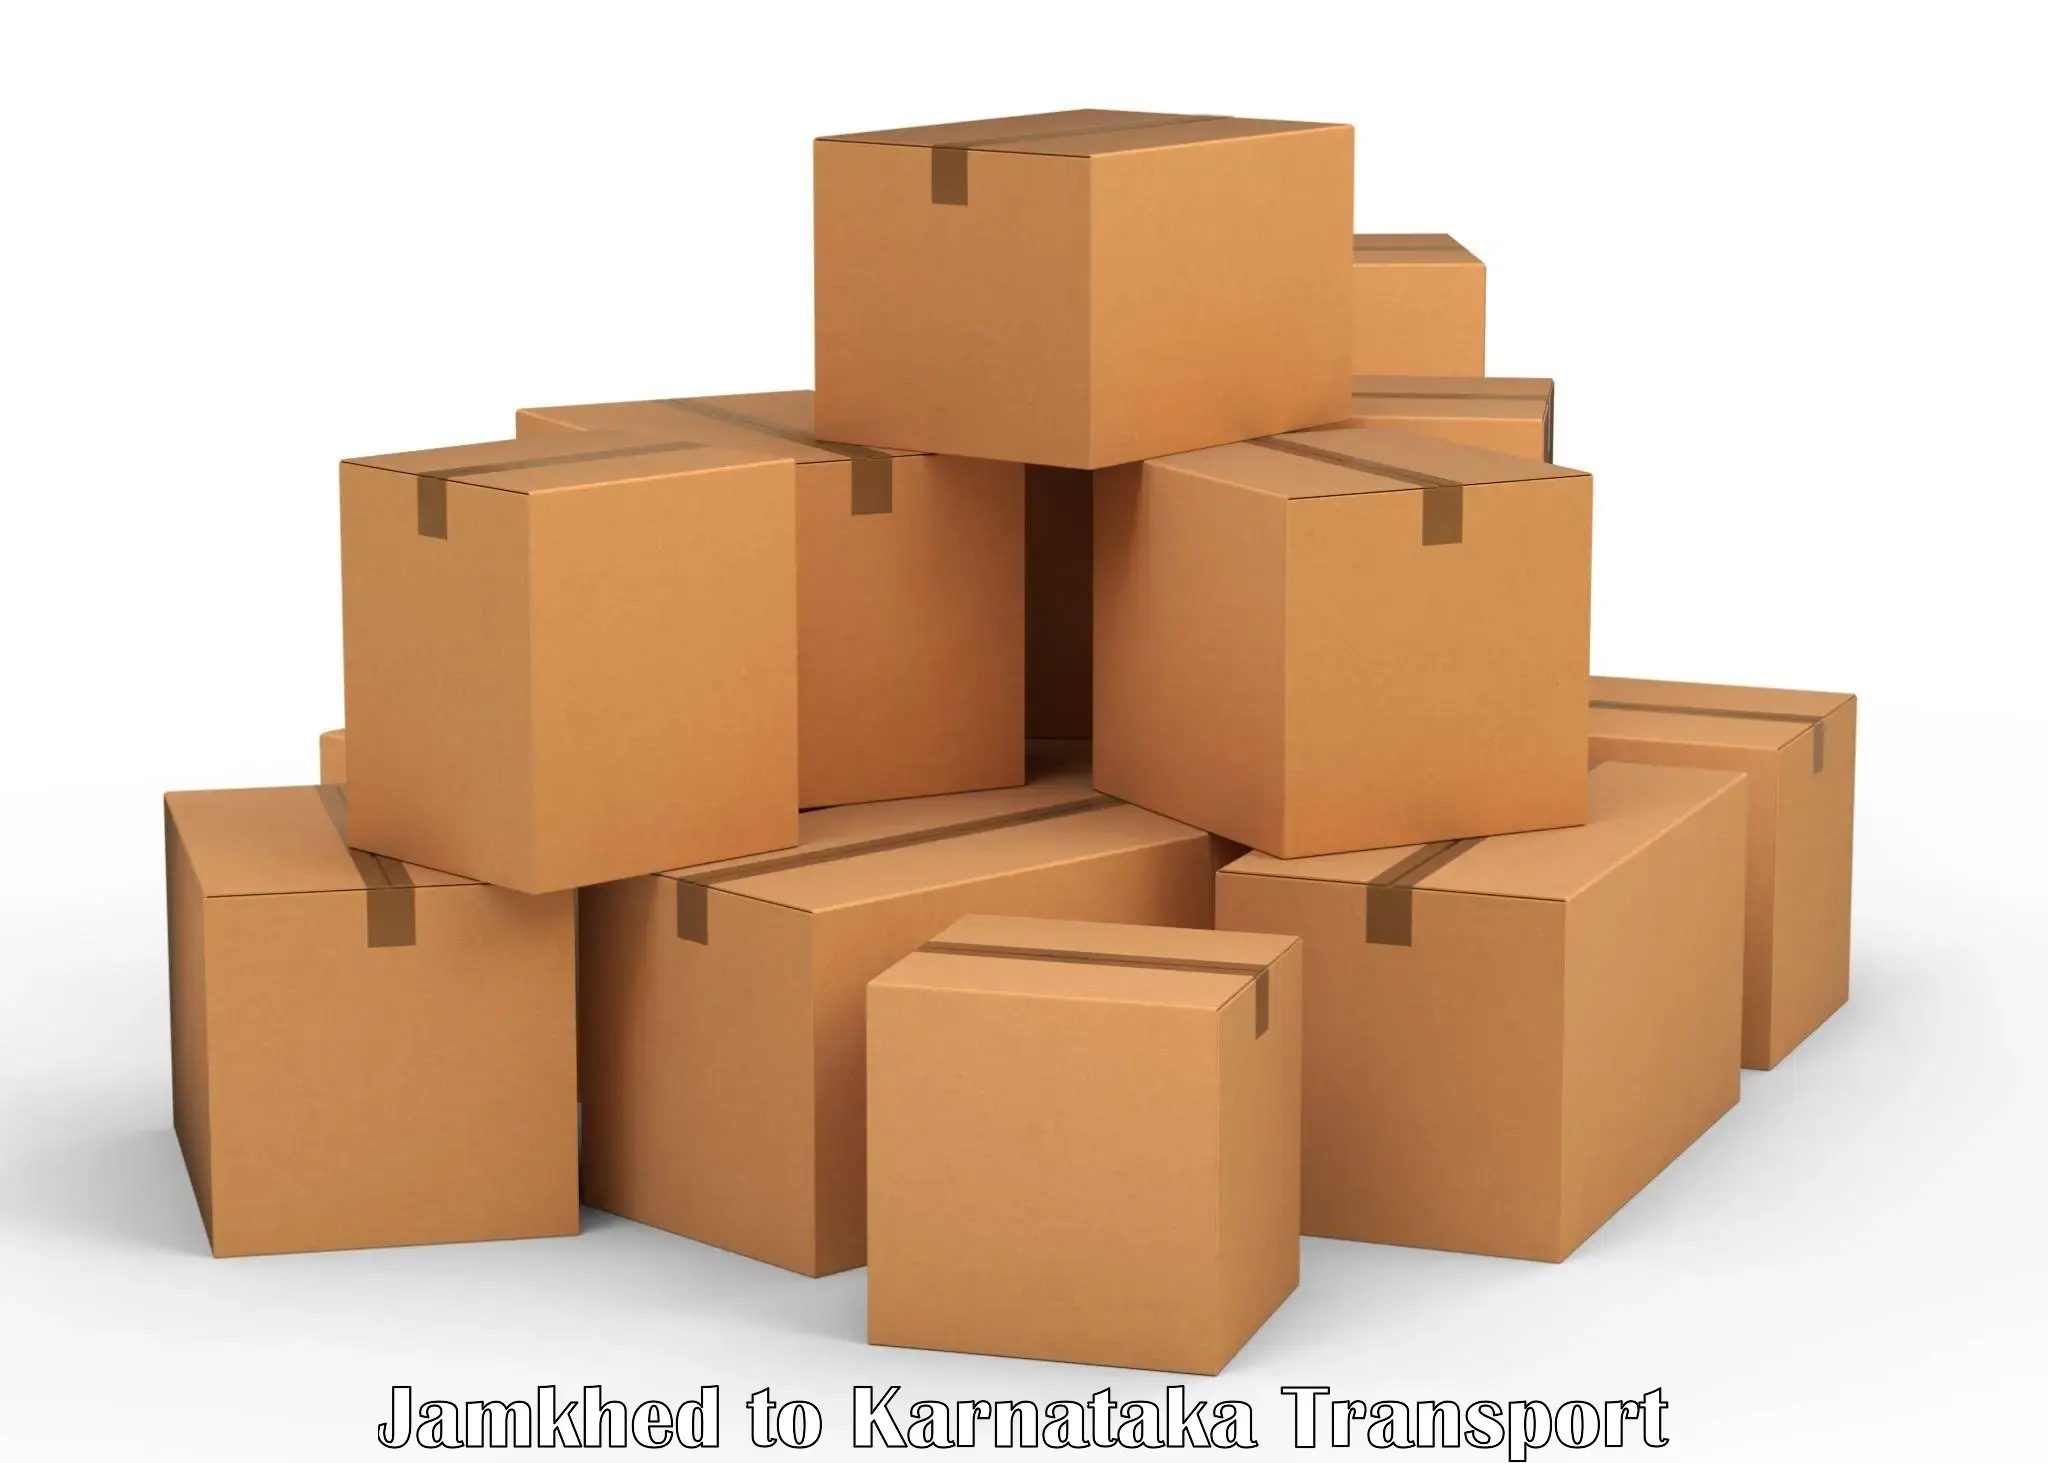 Container transportation services Jamkhed to Mangalore